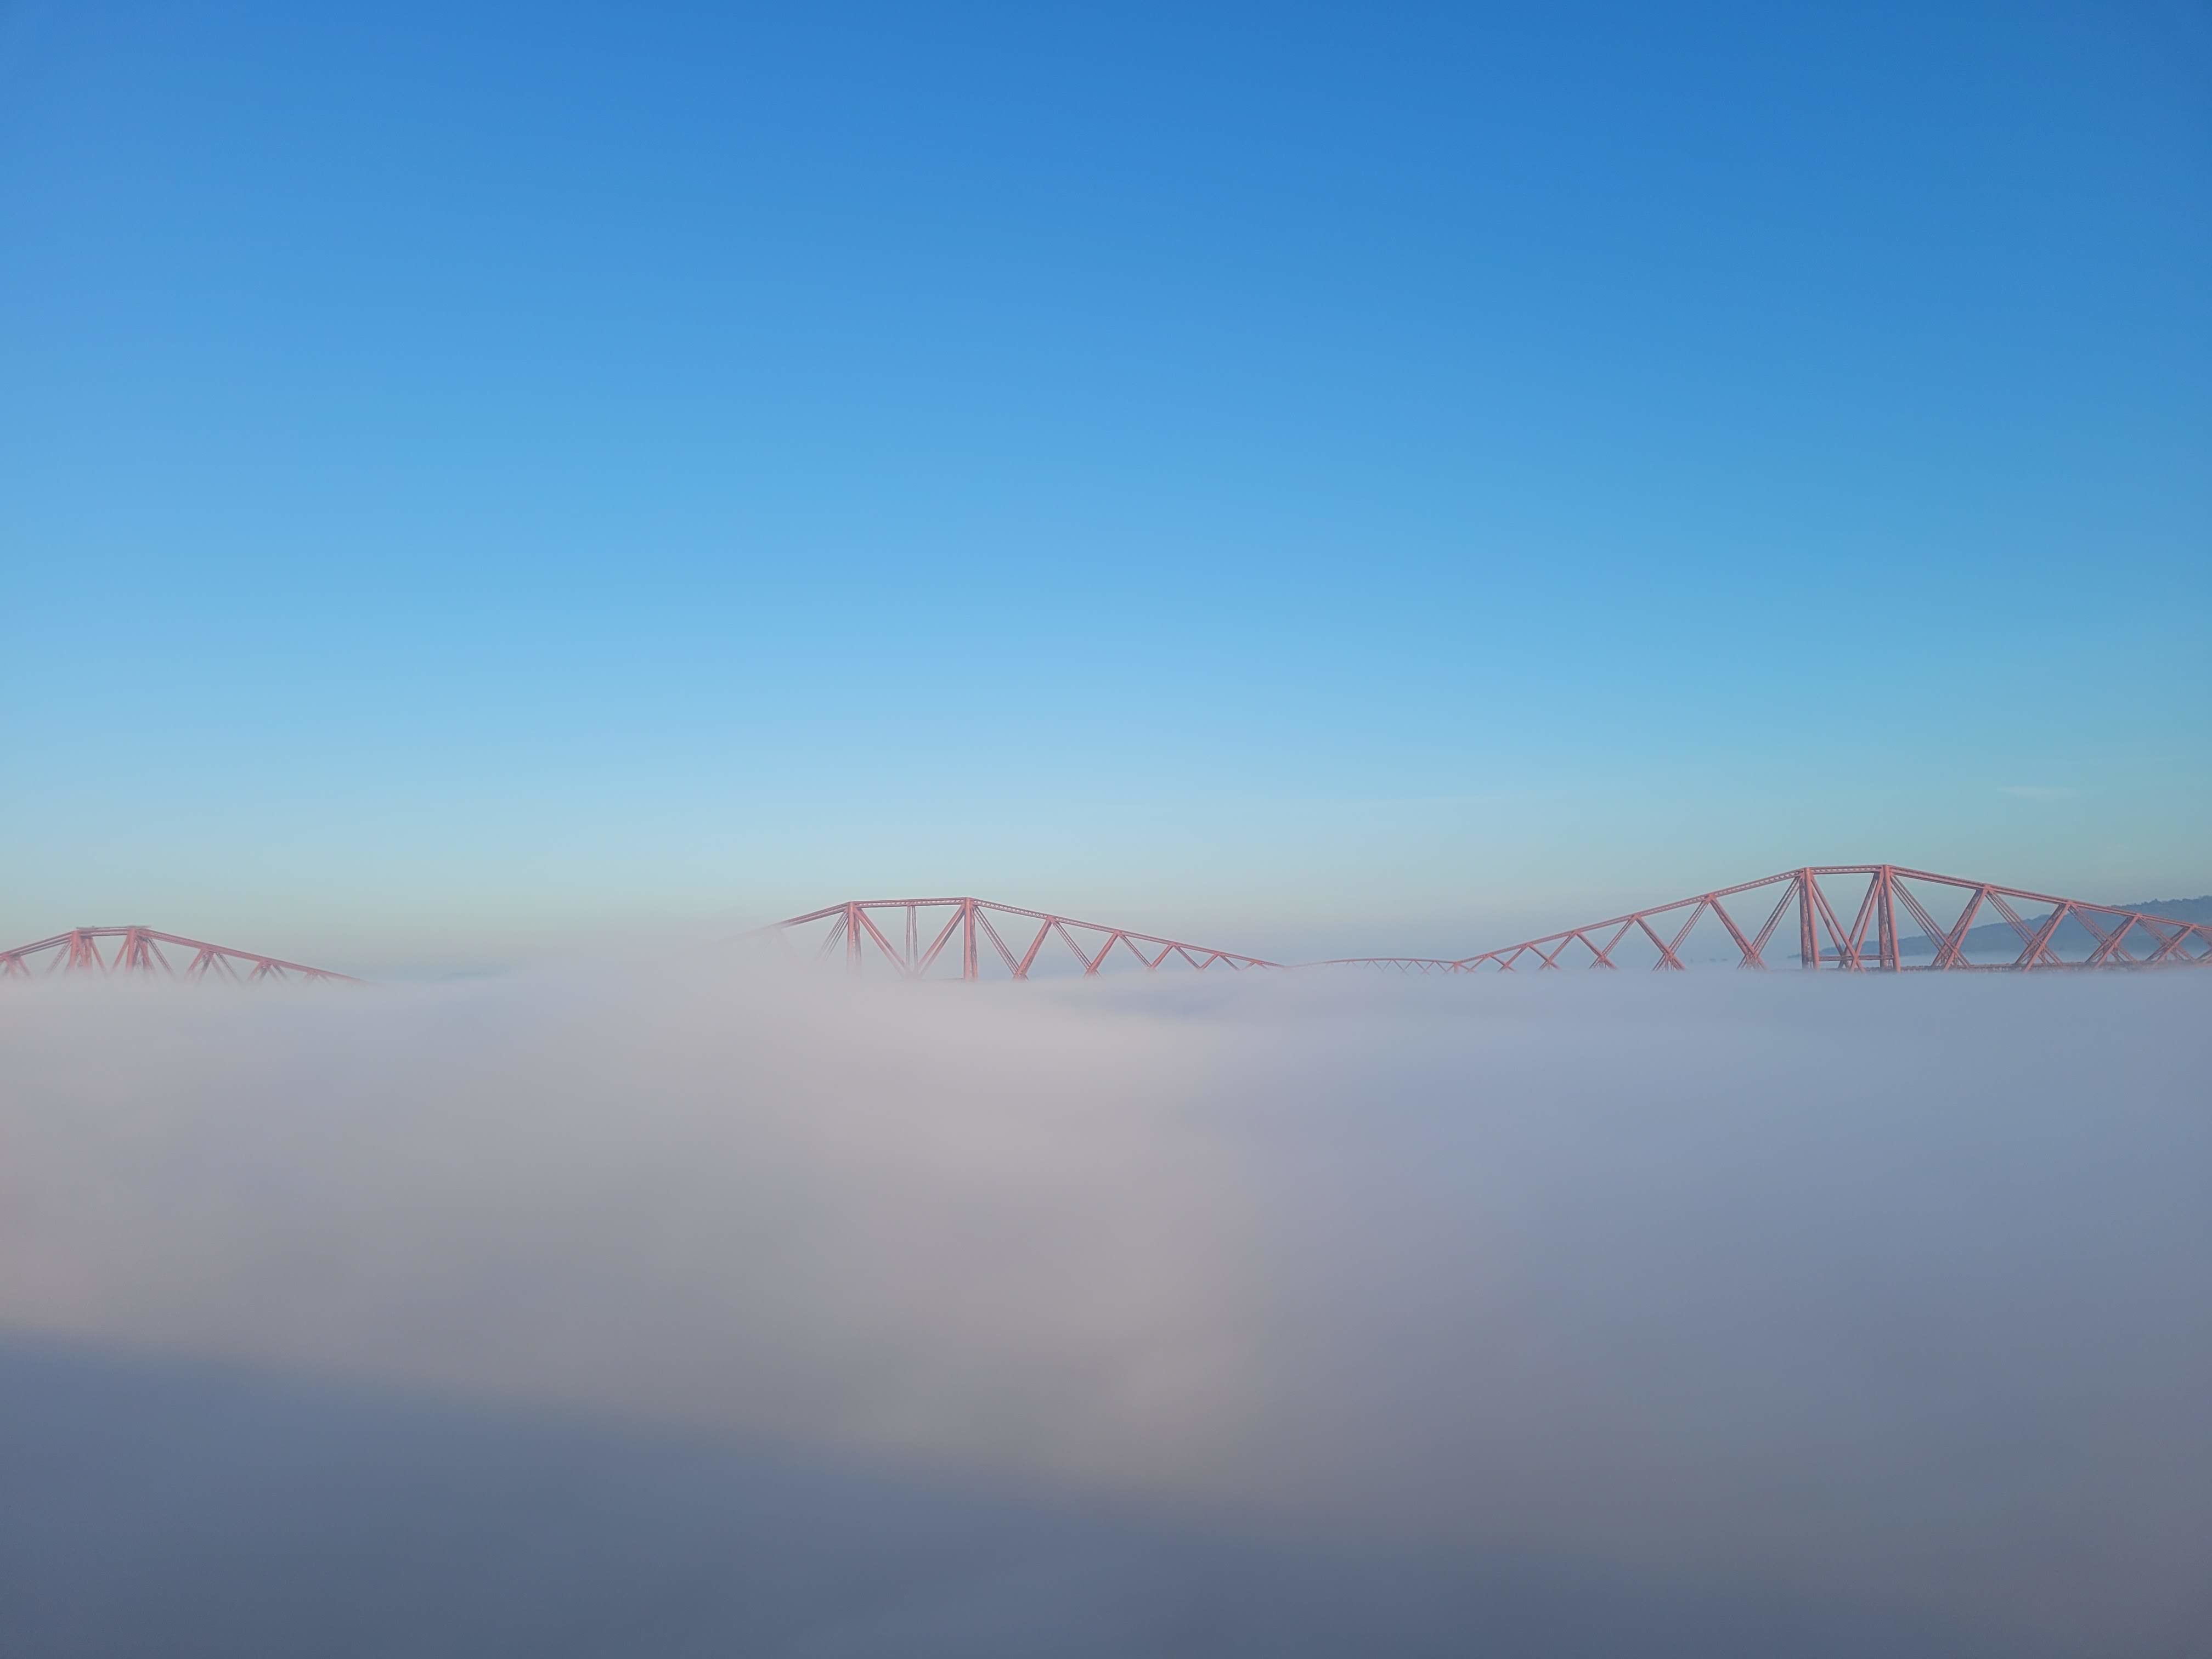 A photograph of Forth Bridge emerging from thick cloud.